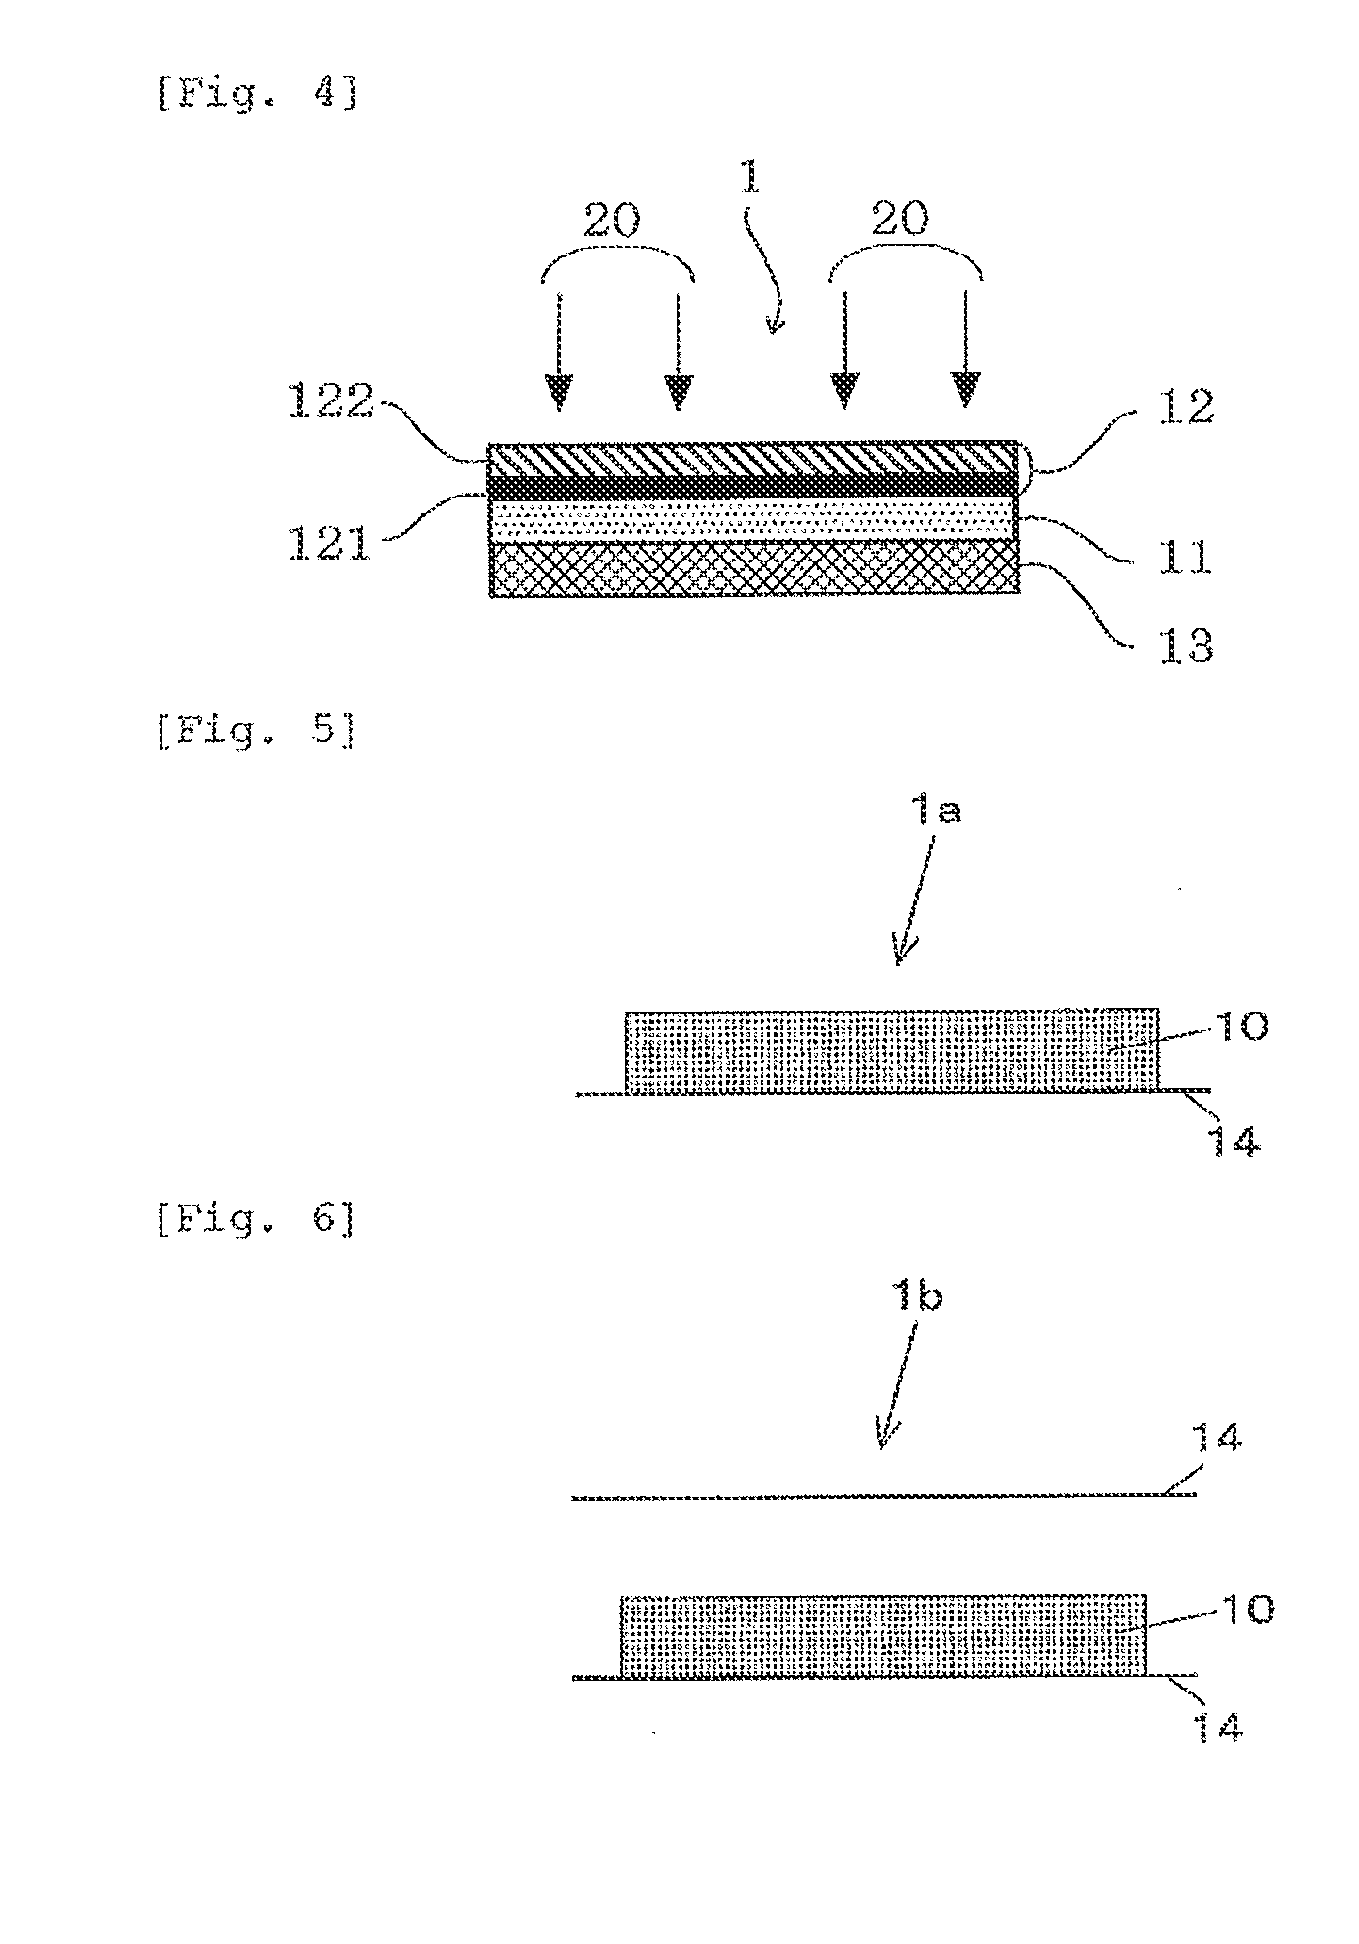 Method of stripping multiple plies of a pressure-sensitive adhesive layer, and a pressure-sensitive adhesive layer used therein